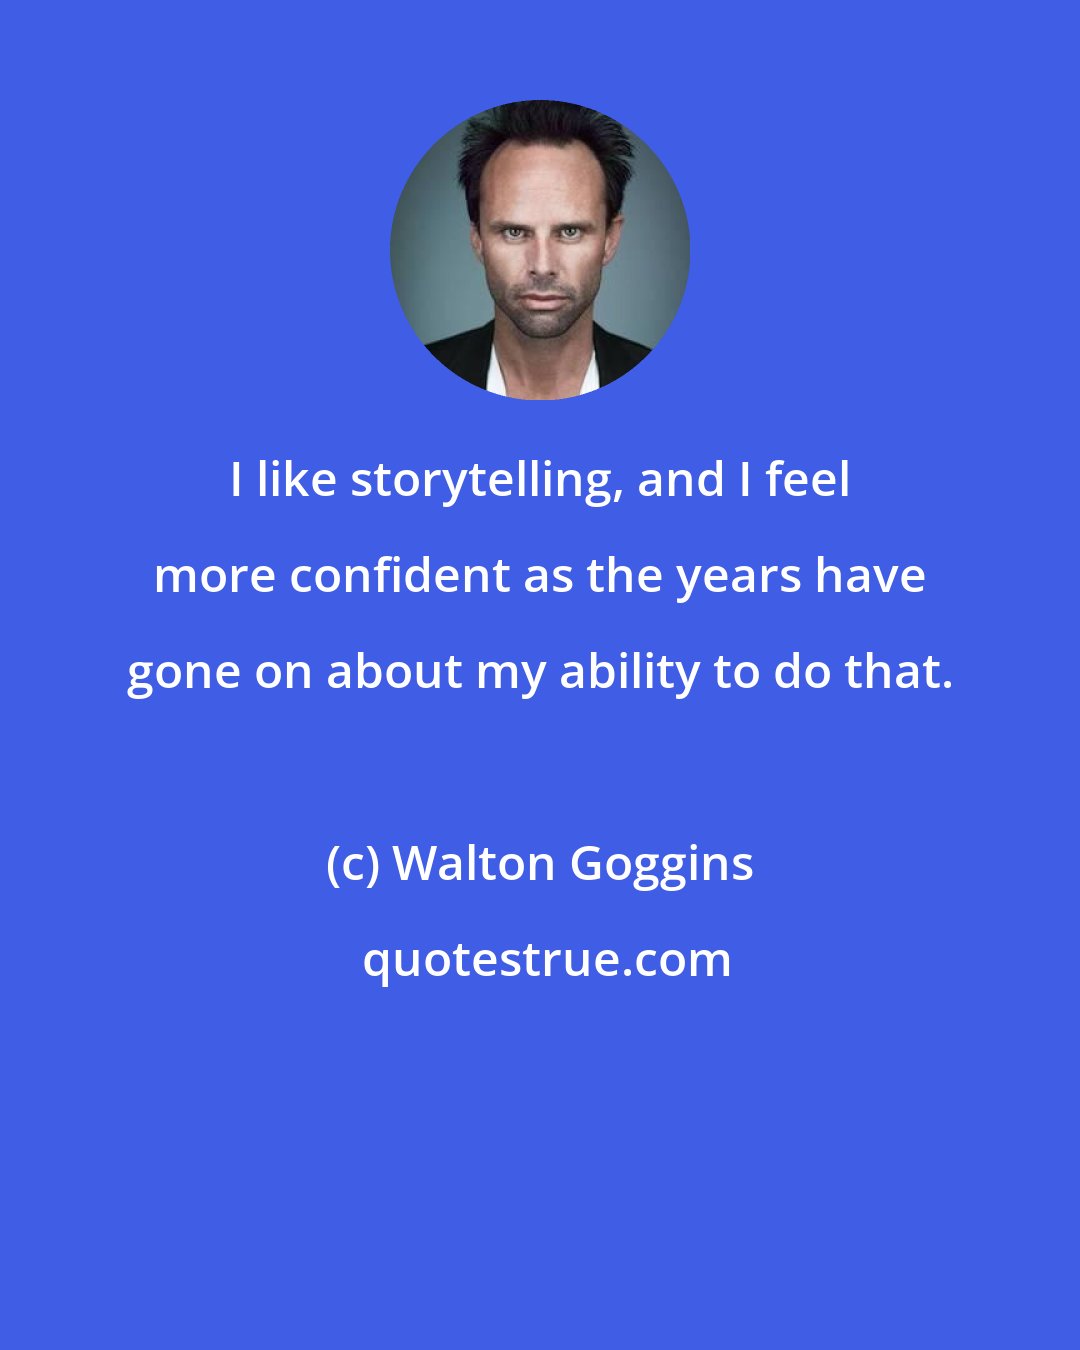 Walton Goggins: I like storytelling, and I feel more confident as the years have gone on about my ability to do that.